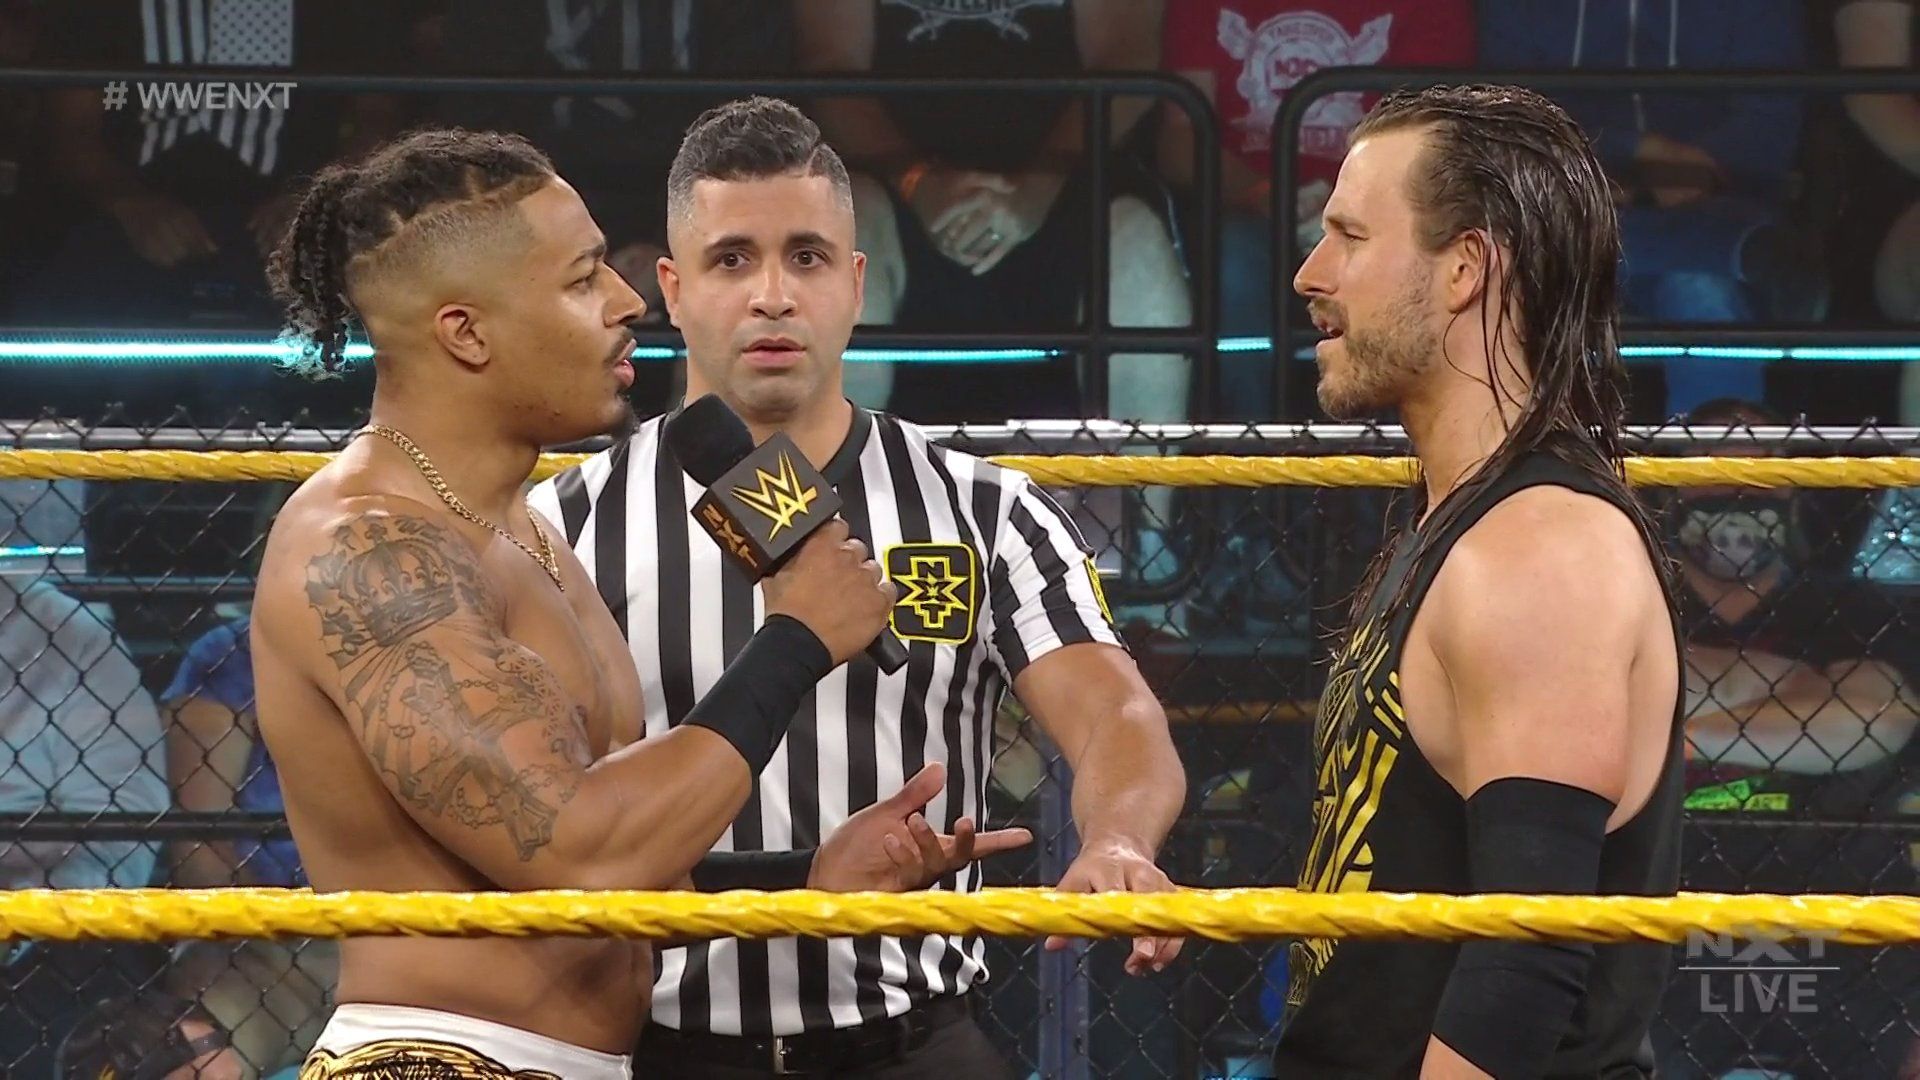 NXT Superstars Carmelo Hayes and Adam Cole on NXT, June 2, 2021